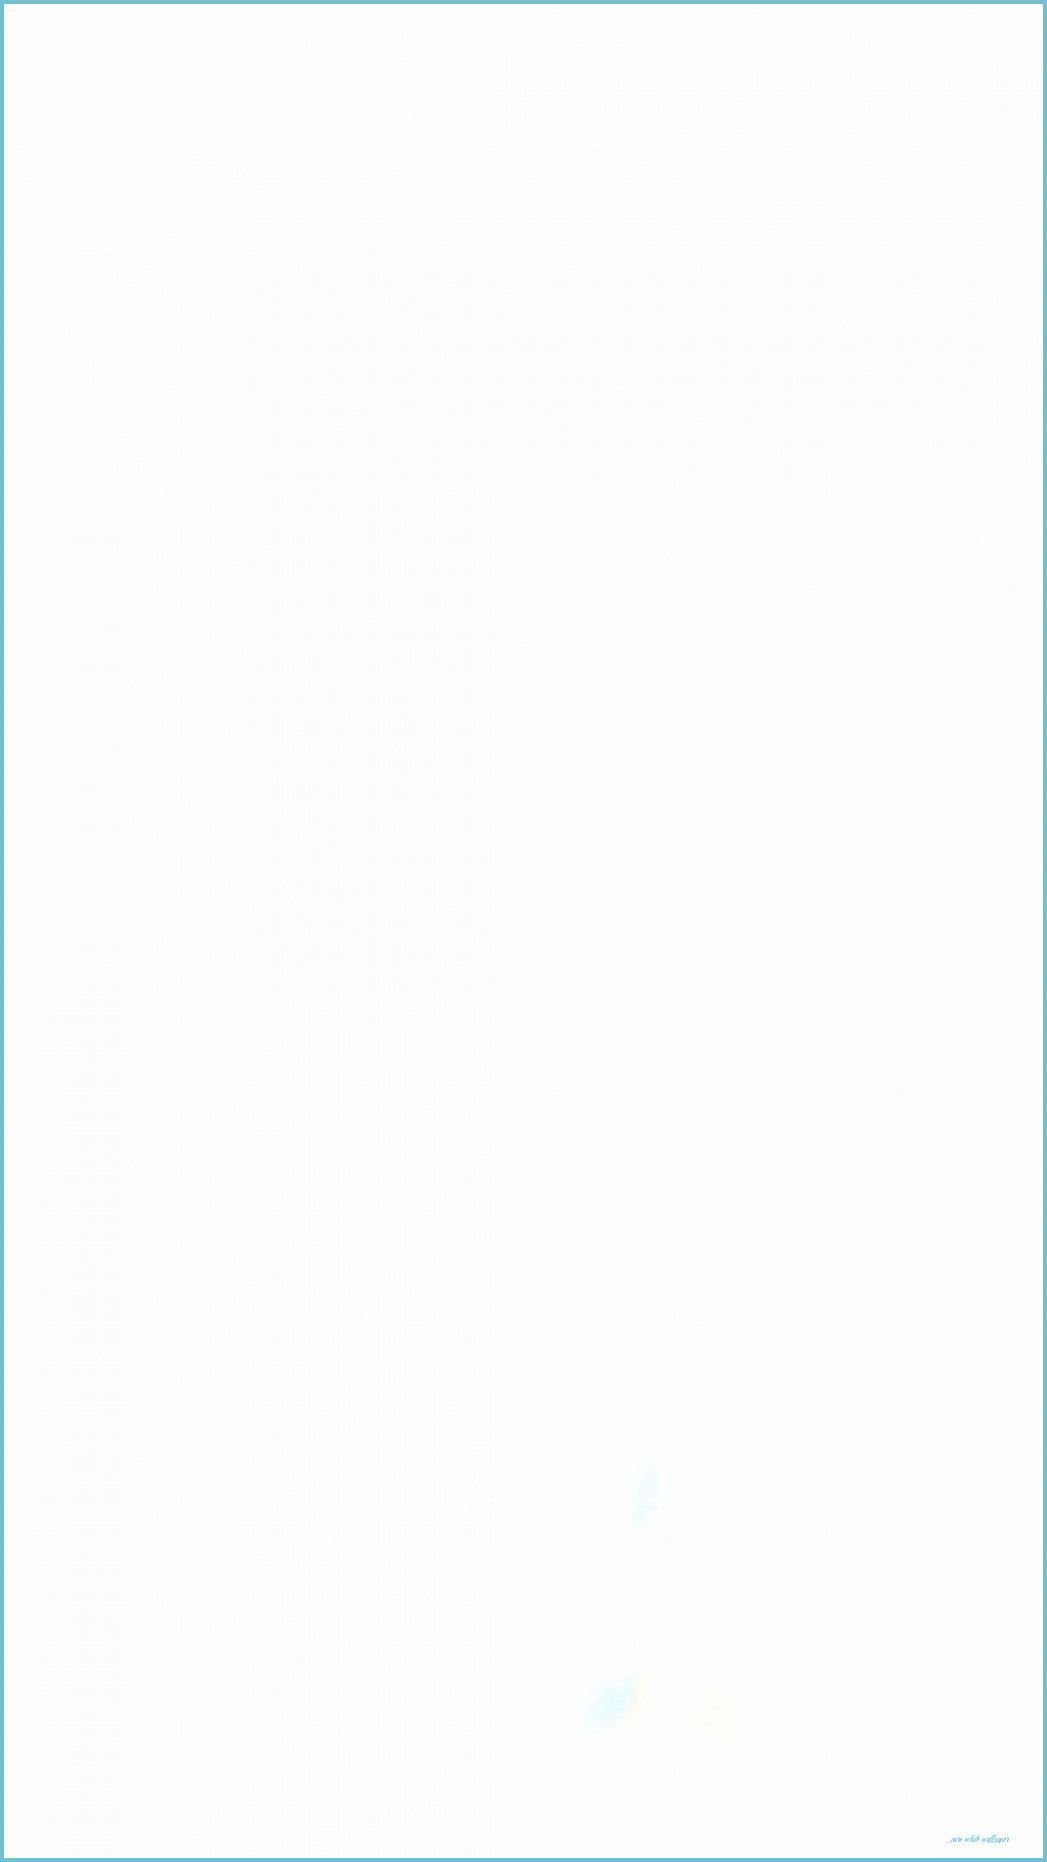 Plain white Wallpapers Download